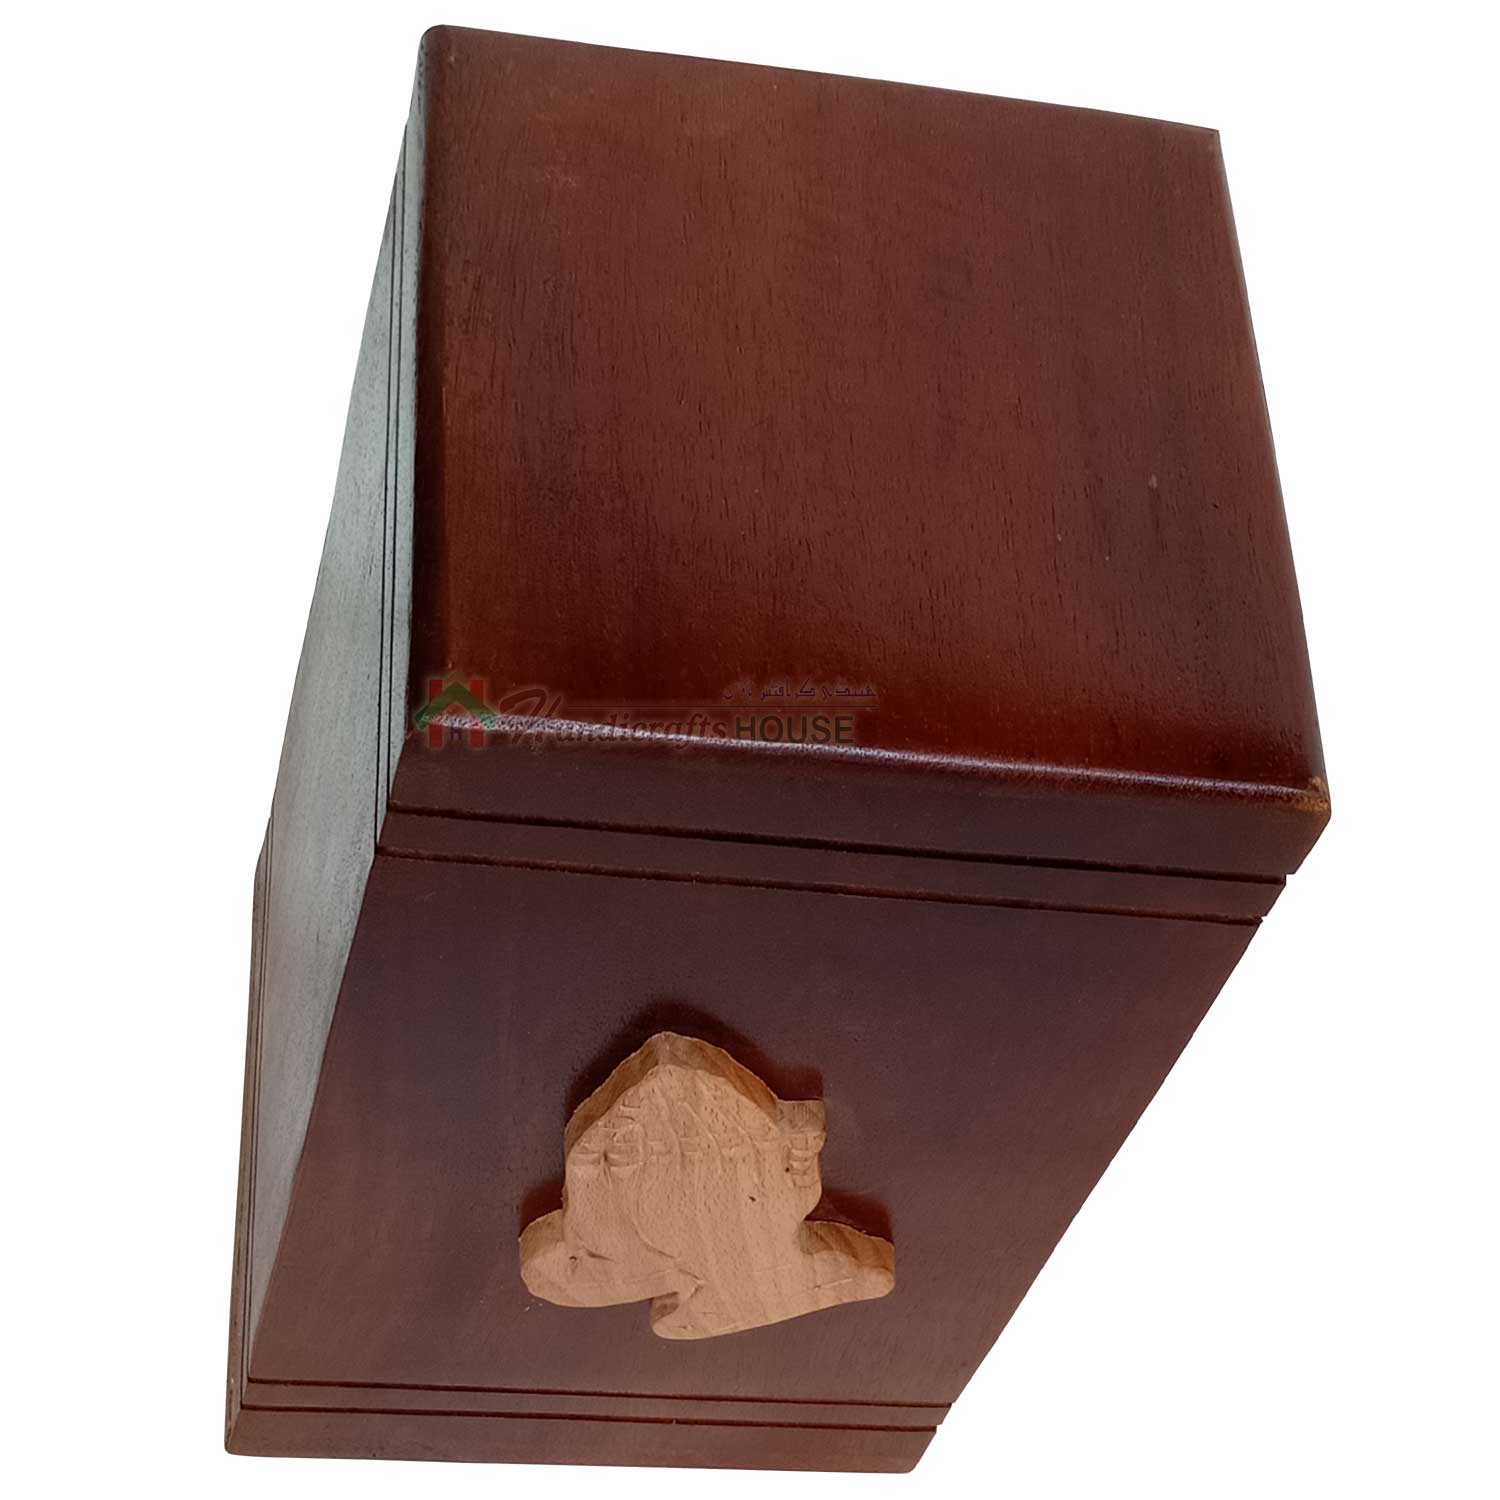 3D Hands Praying Rosewood Urns for Human or Pet Ashes, Wooden Funeral Cremation Urn for Adult, Burial Keepsake – Memorials Box